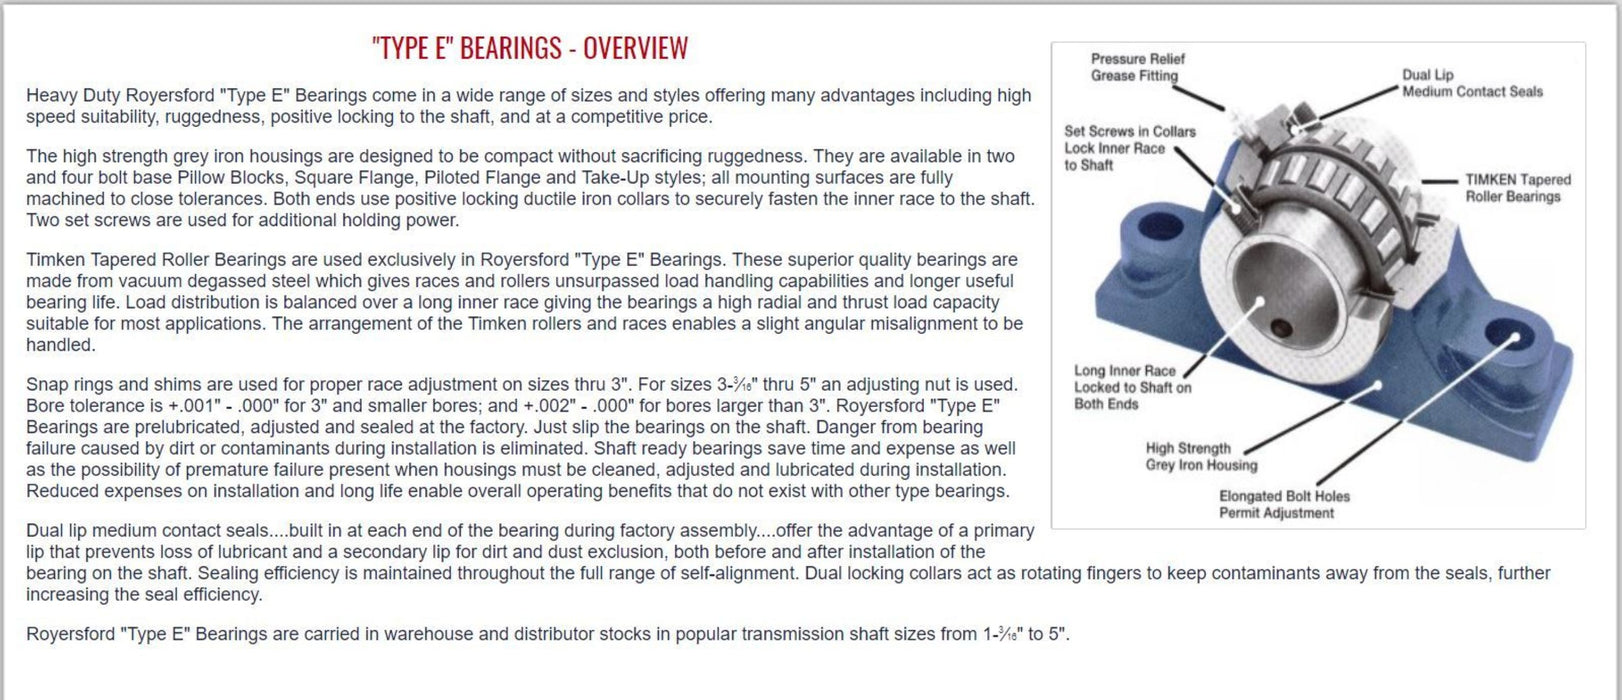 20-05-0308, Royersford Type E 4 Bolt Square Flange Bearing, 3-1/2" with Timken Tapered Roller Bearings